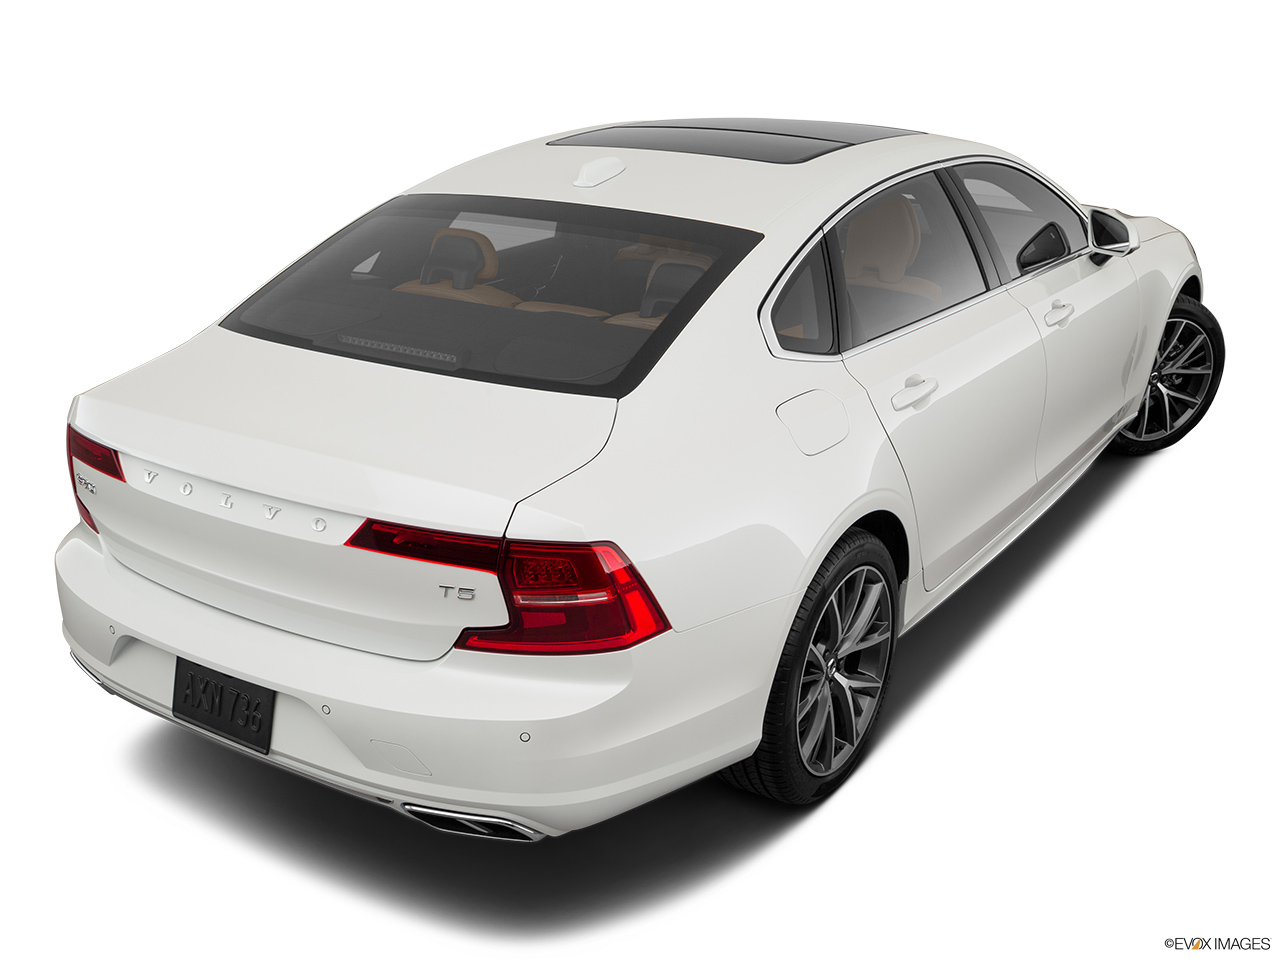 2019 Volvo S90 T5 Momentum Rear 3/4 angle view. 